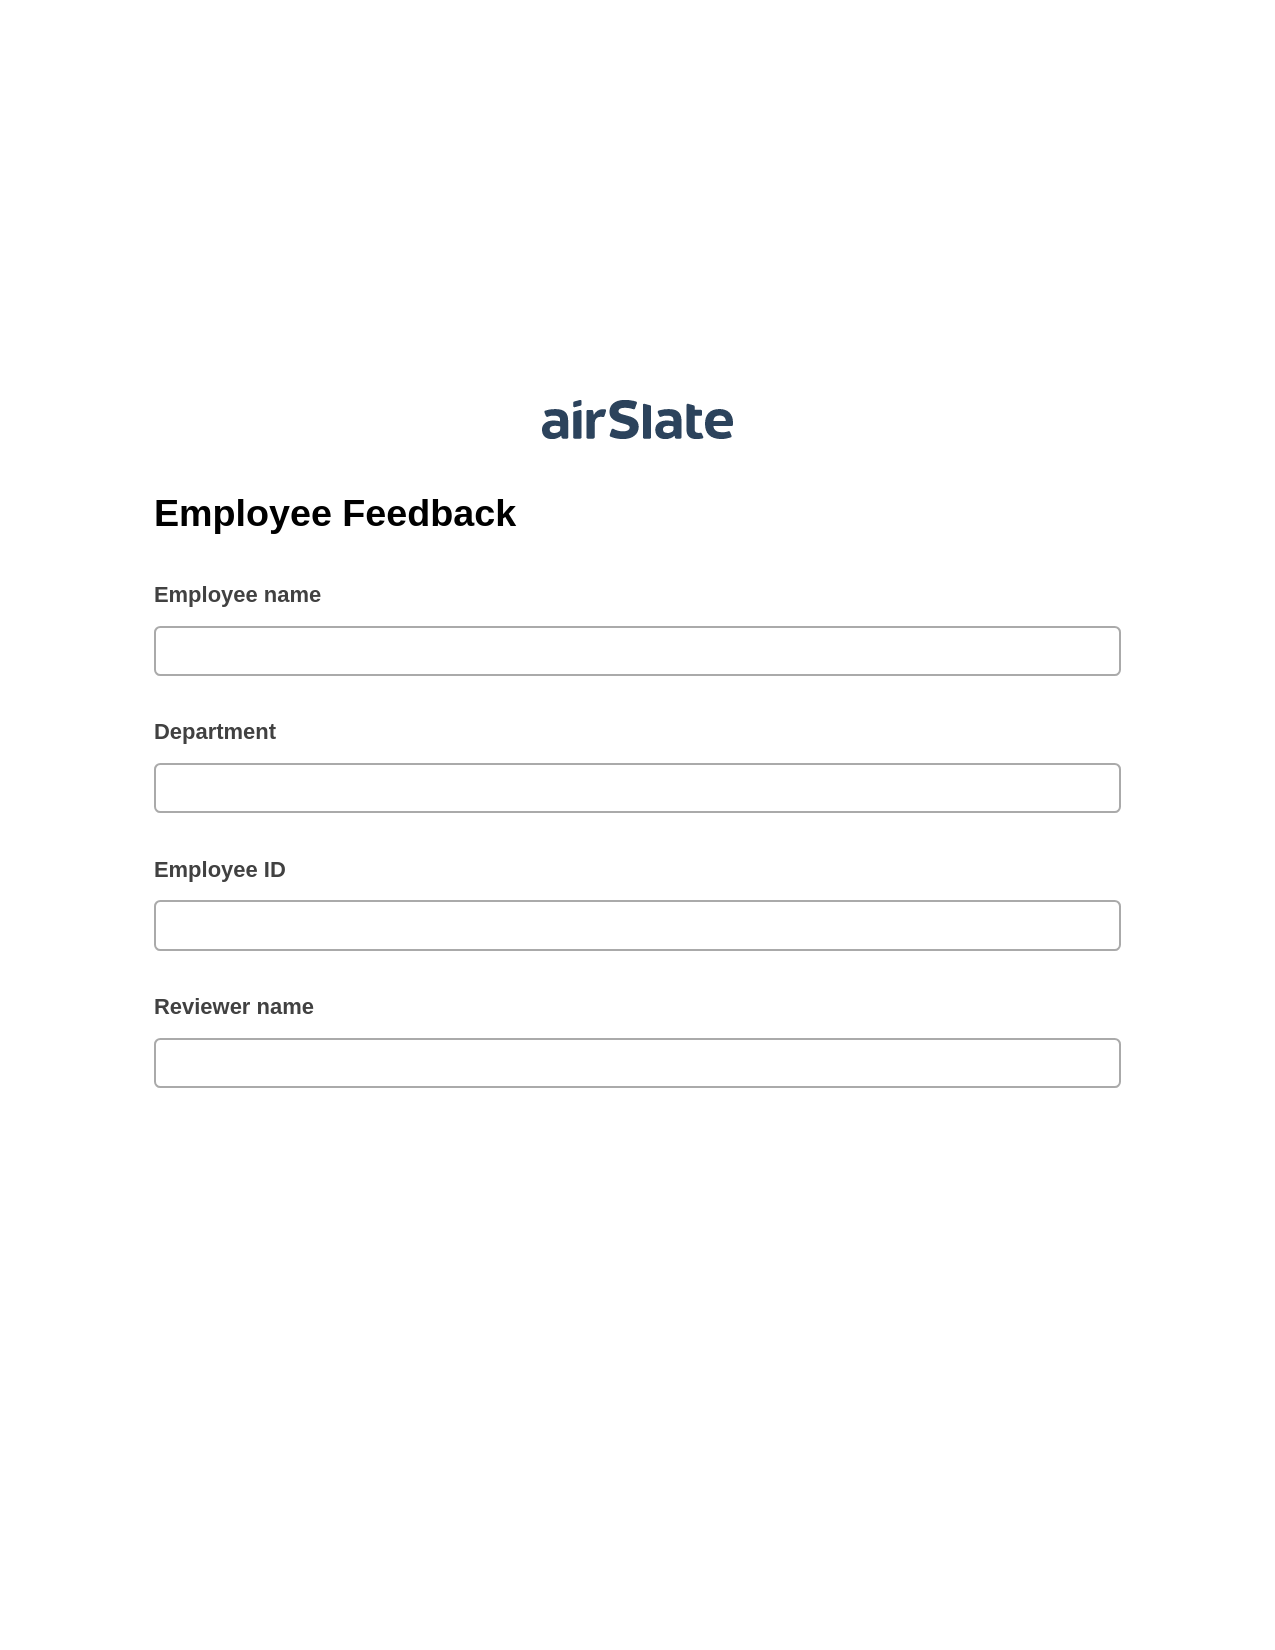 Employee Feedback Pre-fill from Google Sheet Dropdown Options Bot, SendGrid send Campaign bot, Export to Formstack Documents Bot